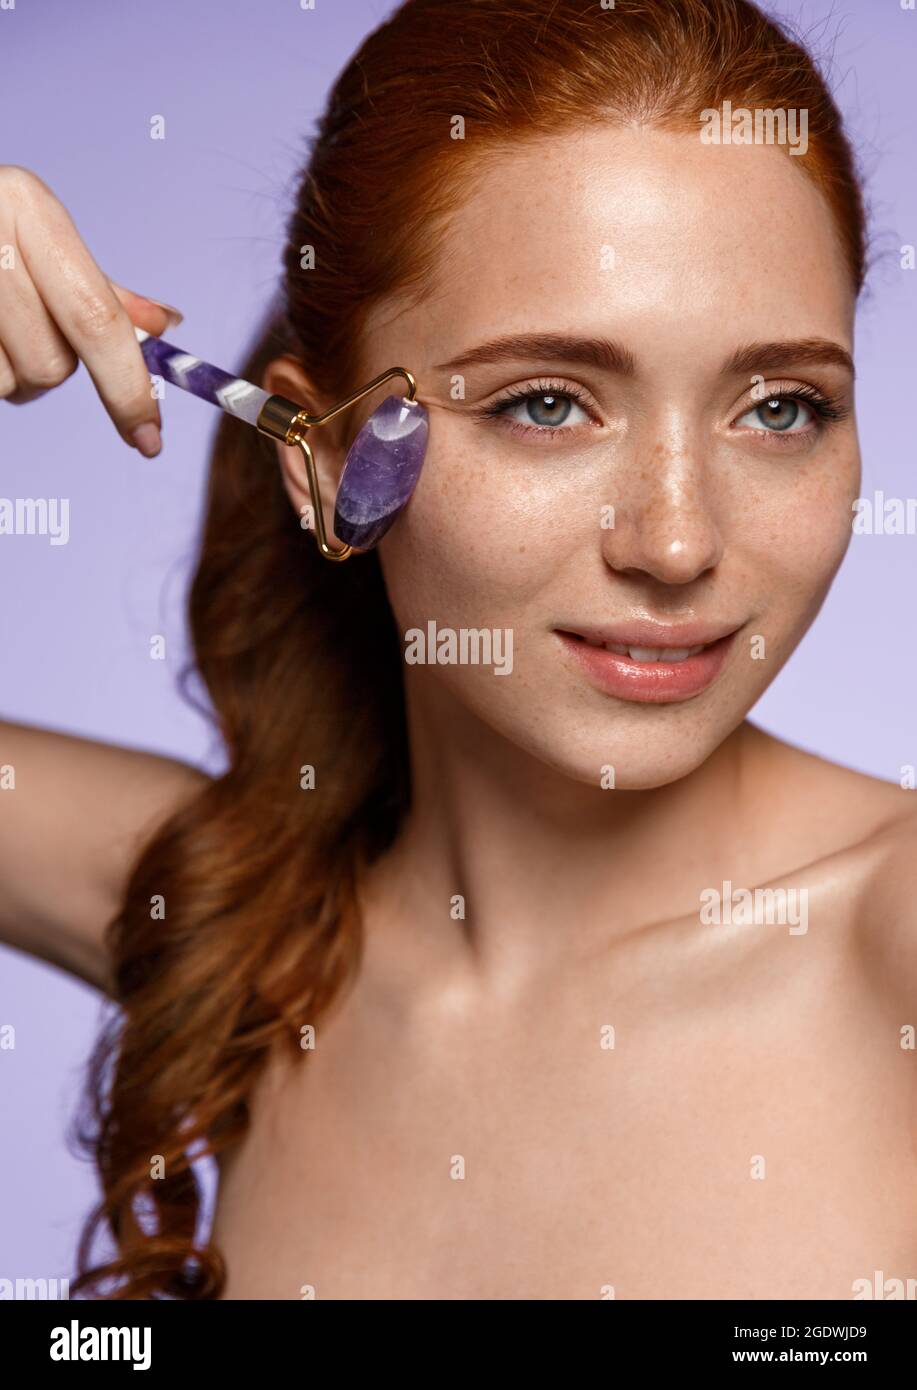 Natural Beauty And Skin Care Concept Portrait Of Smiling Redhead Woman Using Quartz Stone